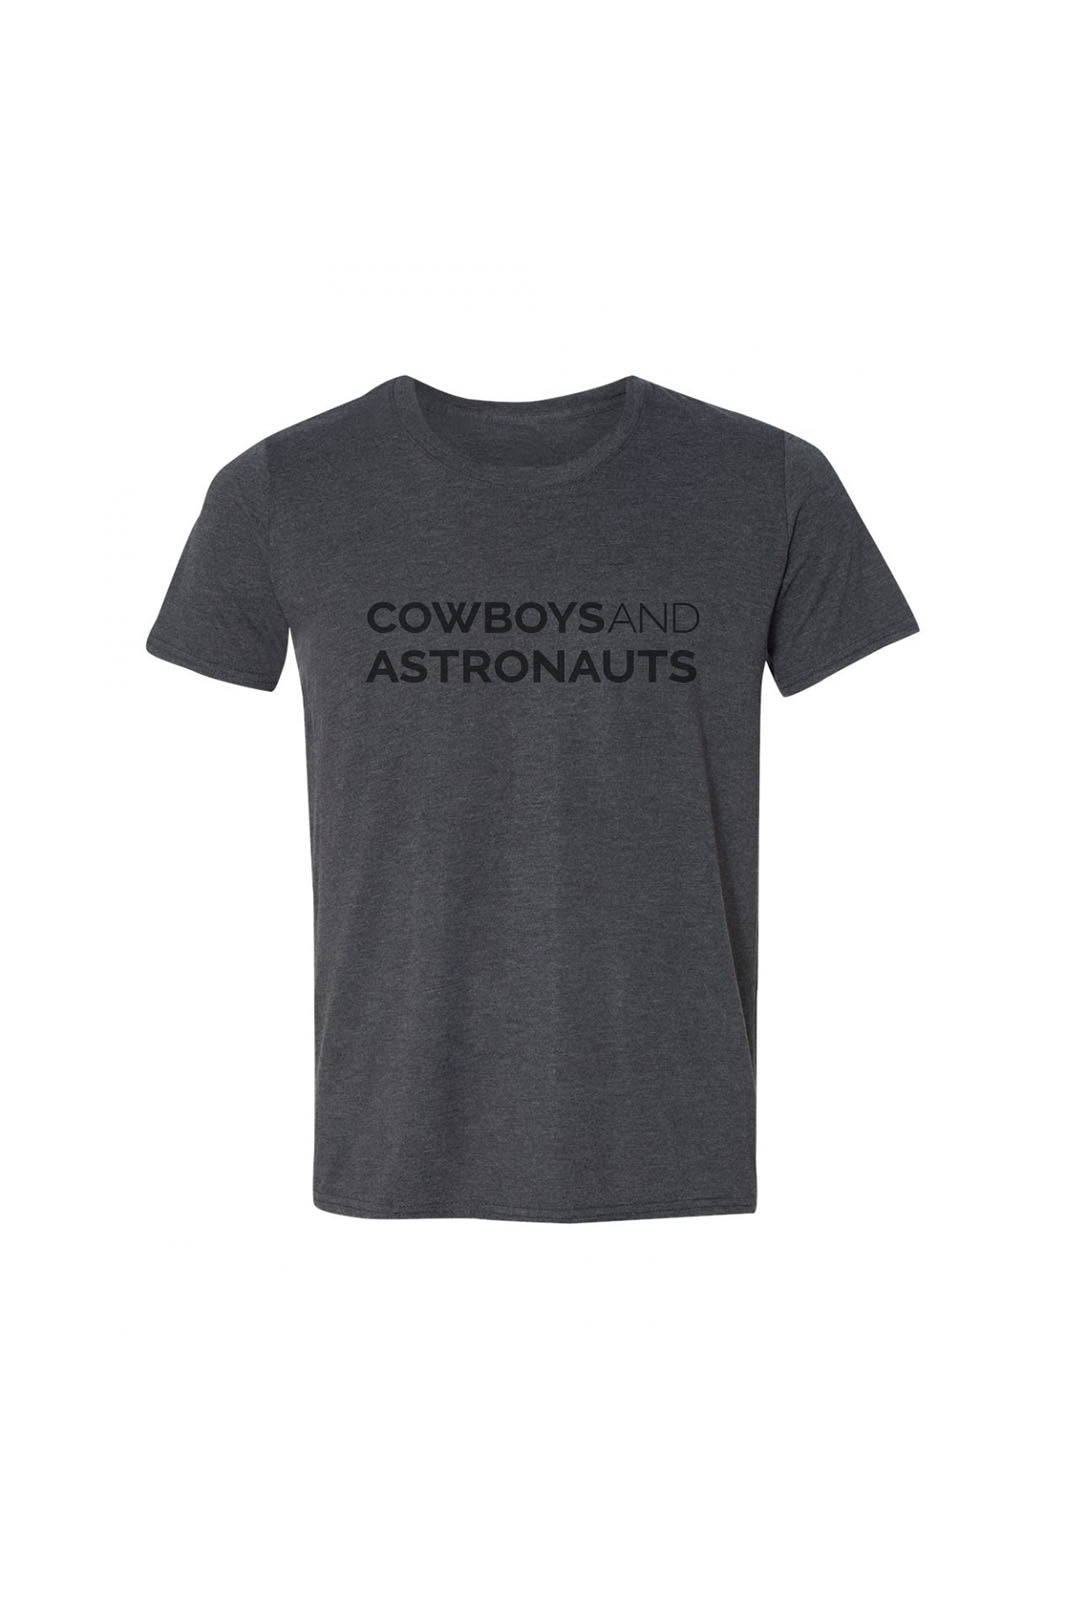 Cowboys and Astronauts T-Shirt - Charcoal